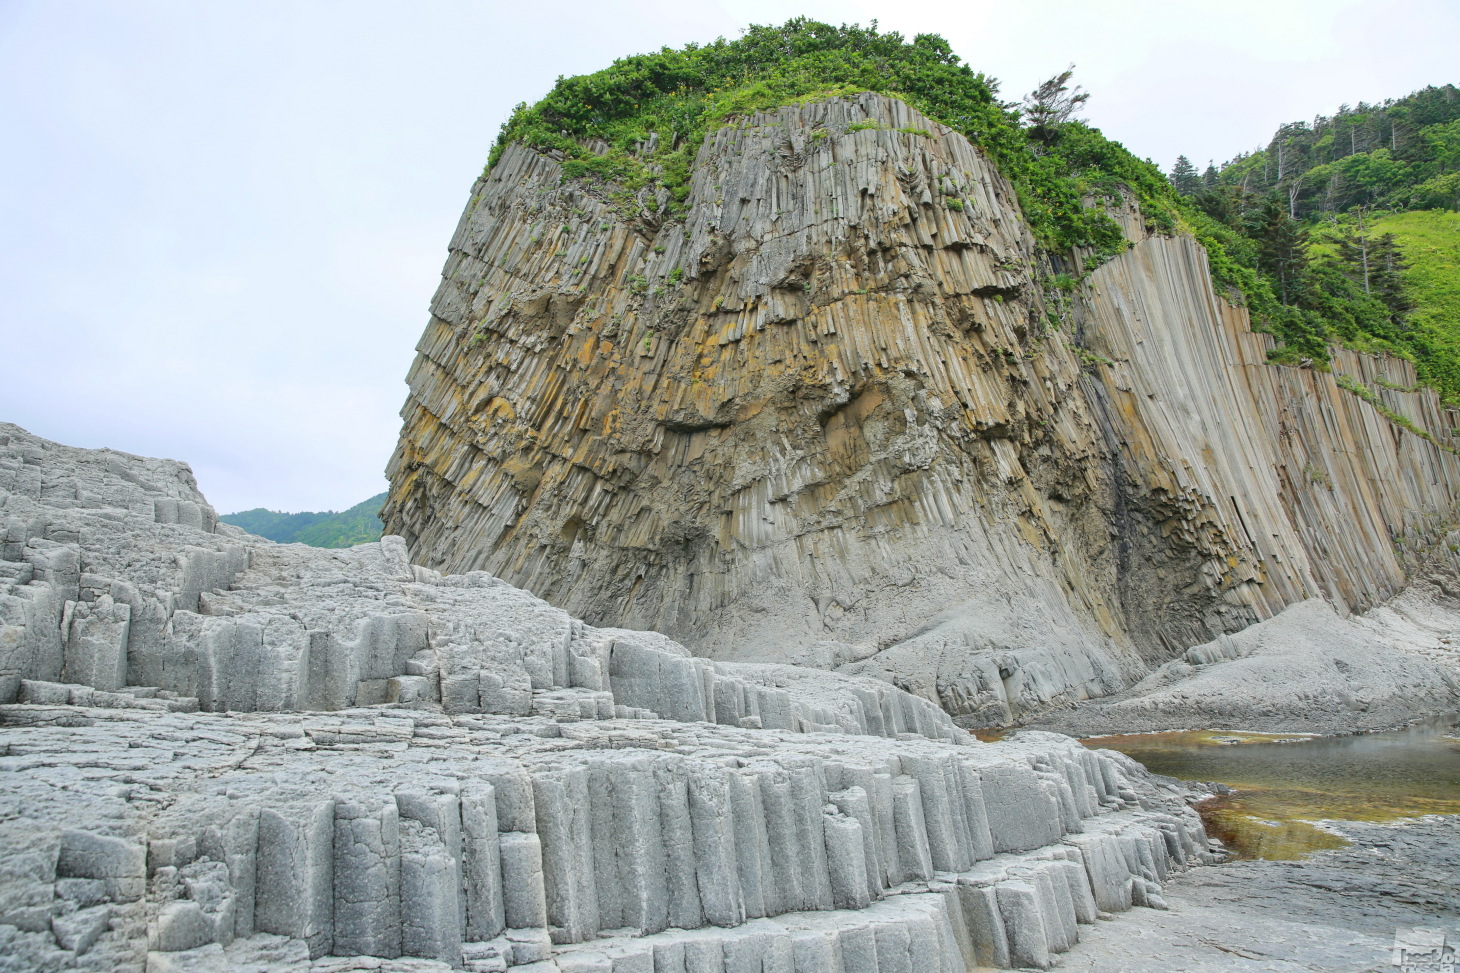 Cape Stolbchaty in the Kuril Islands. The natural columns resemble an amphitheater. 